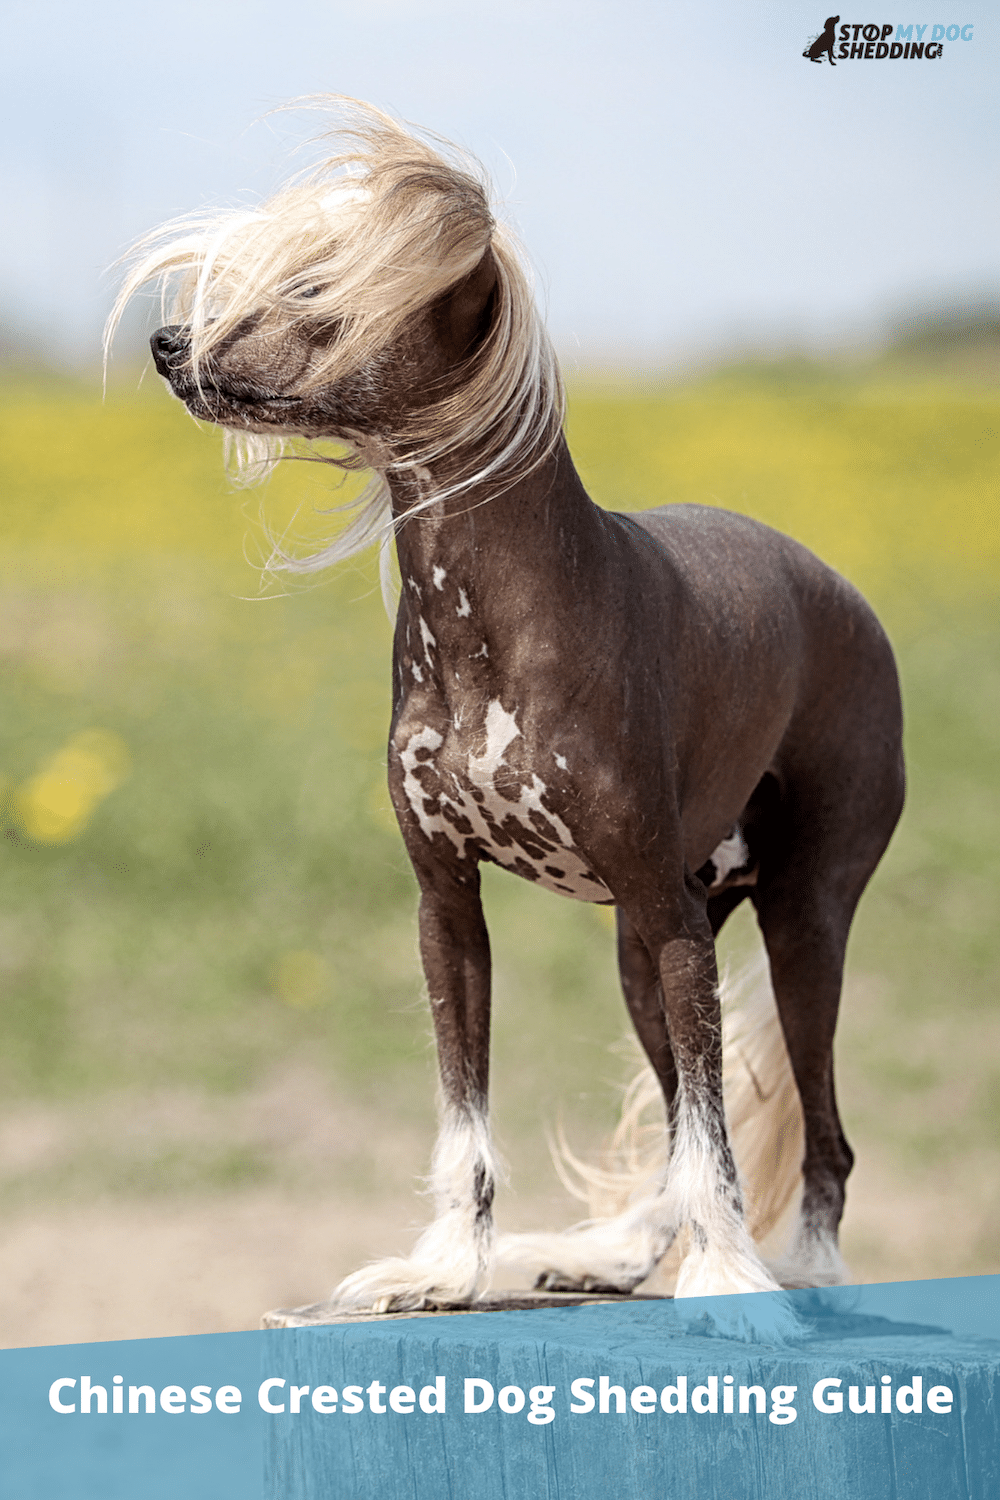 Do Chinese Crested Dogs Shed?